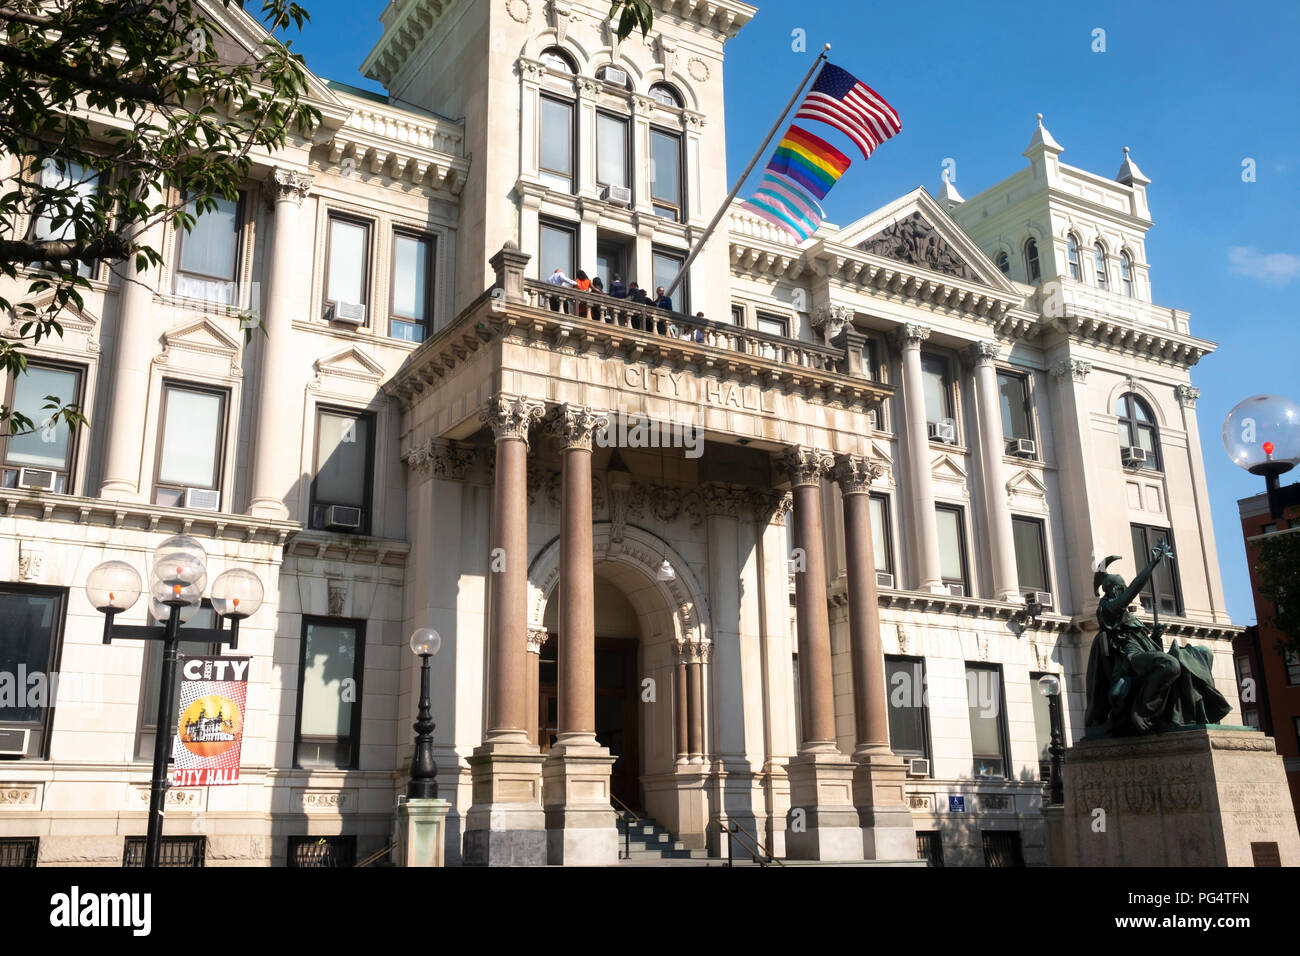 Transgender, Pride, and American flag hang over city hall in Jersey City, USA Stock Photo